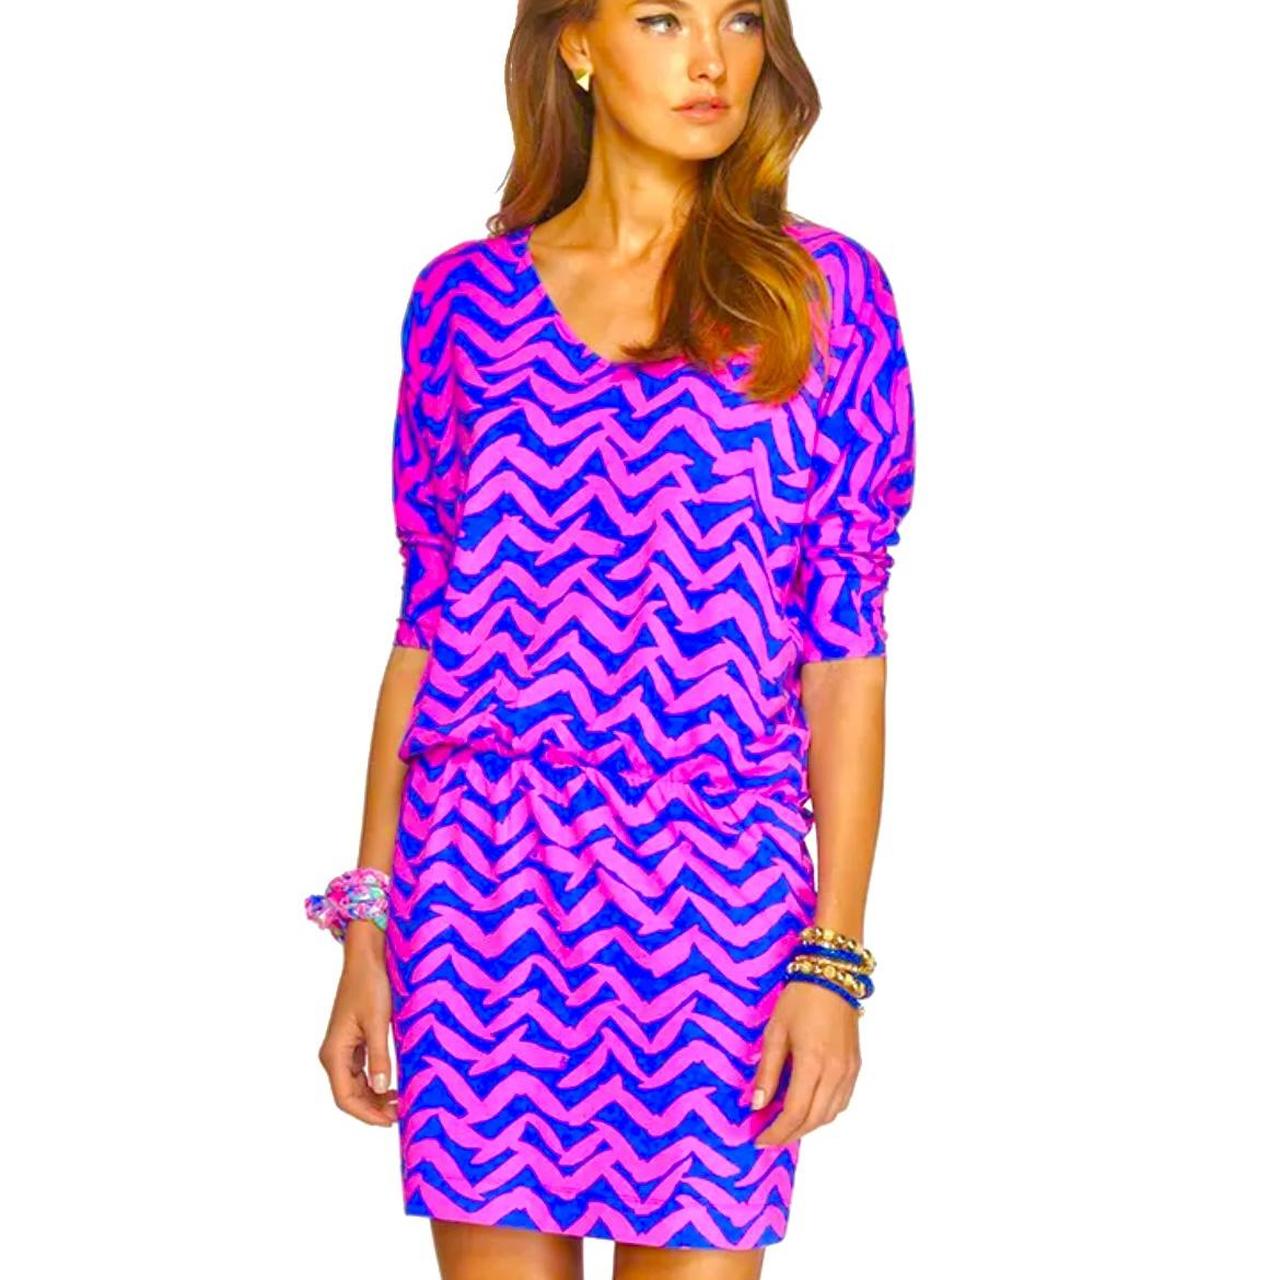 Lilly Pulitzer Women's Pink and Blue Dress